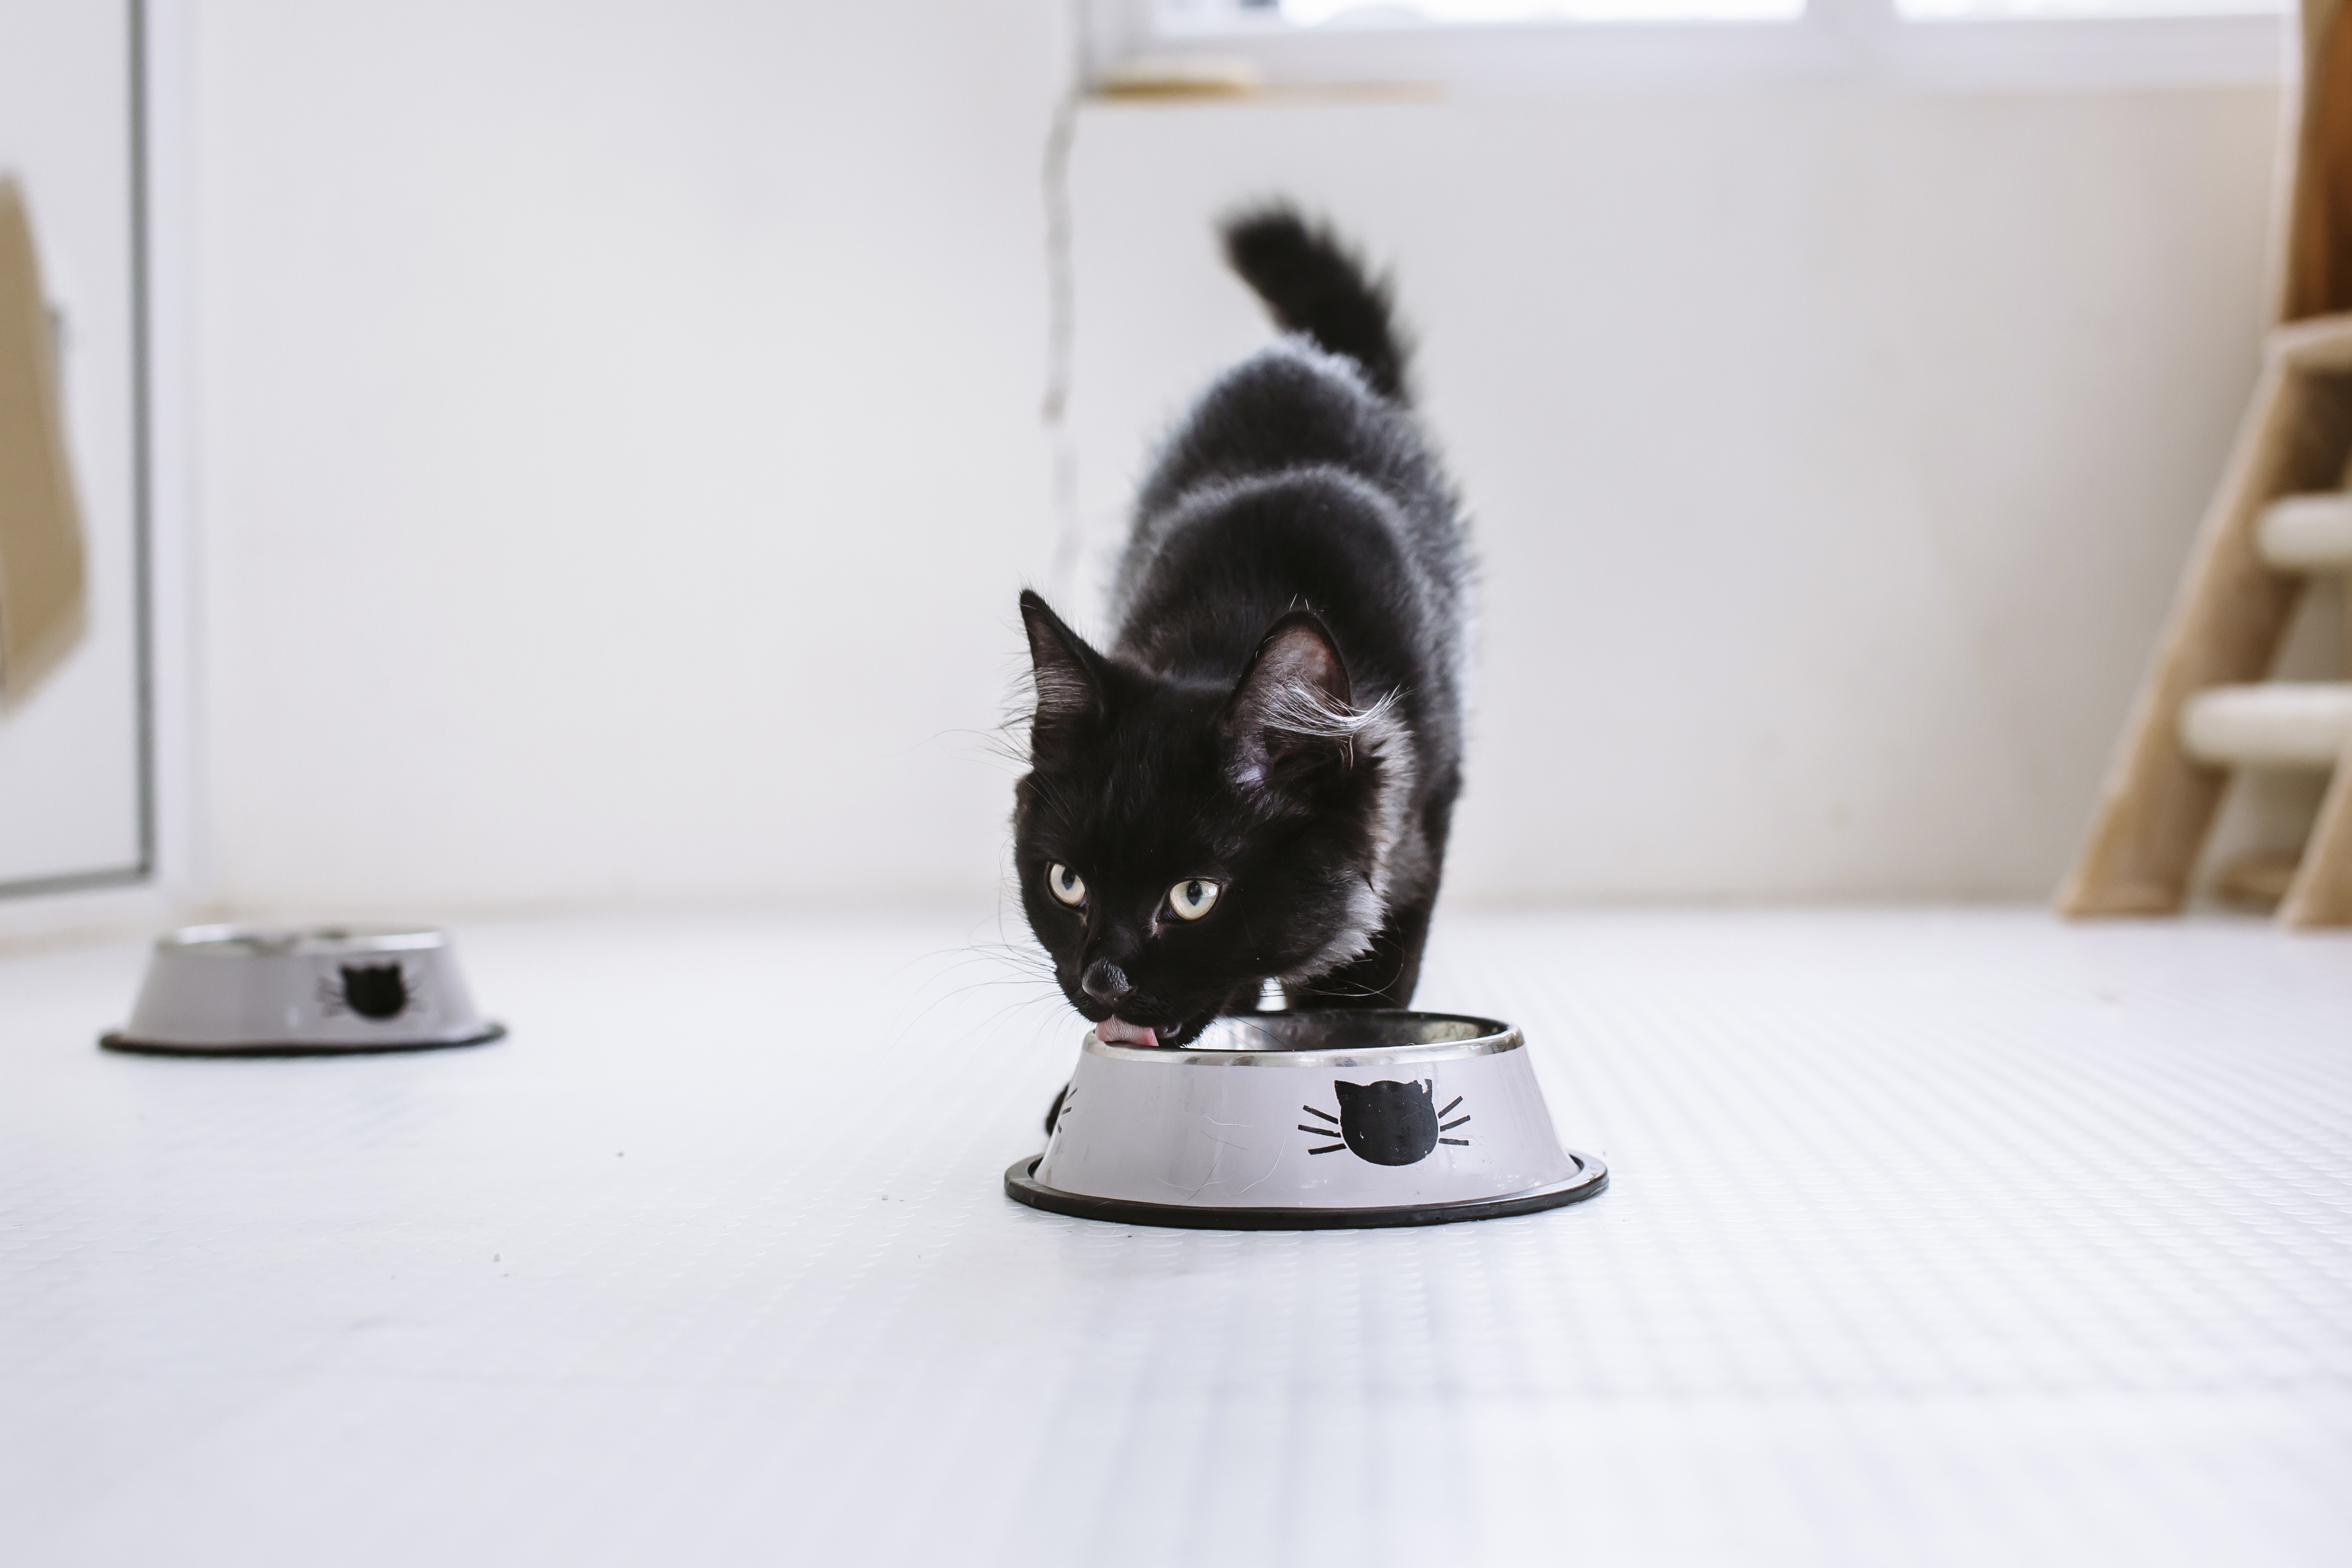 A black cat eating from a silver food dish.